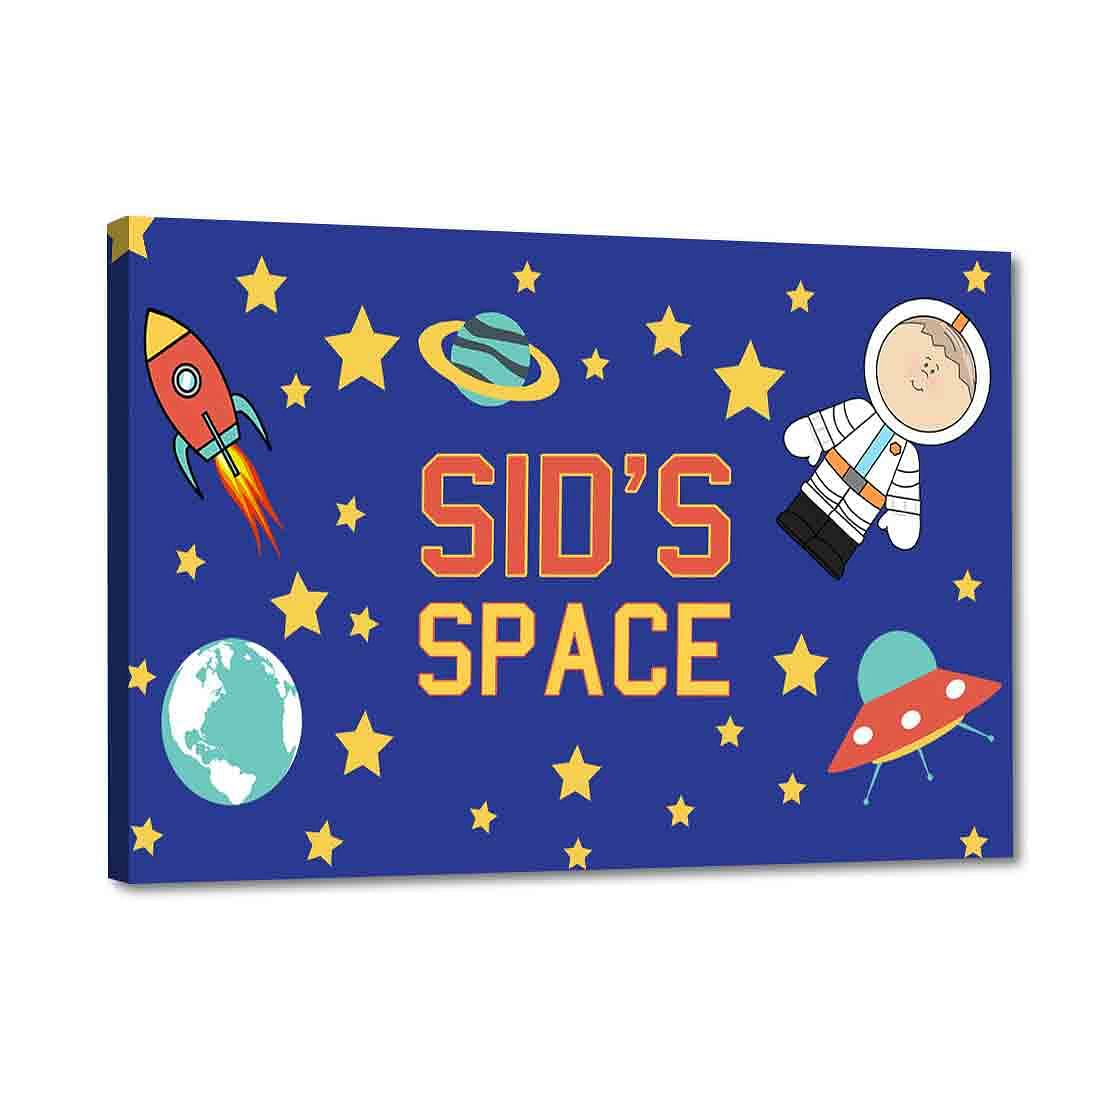 Customized Children's Door Name Plate - Space Astronaut Galaxy Universe Nutcase